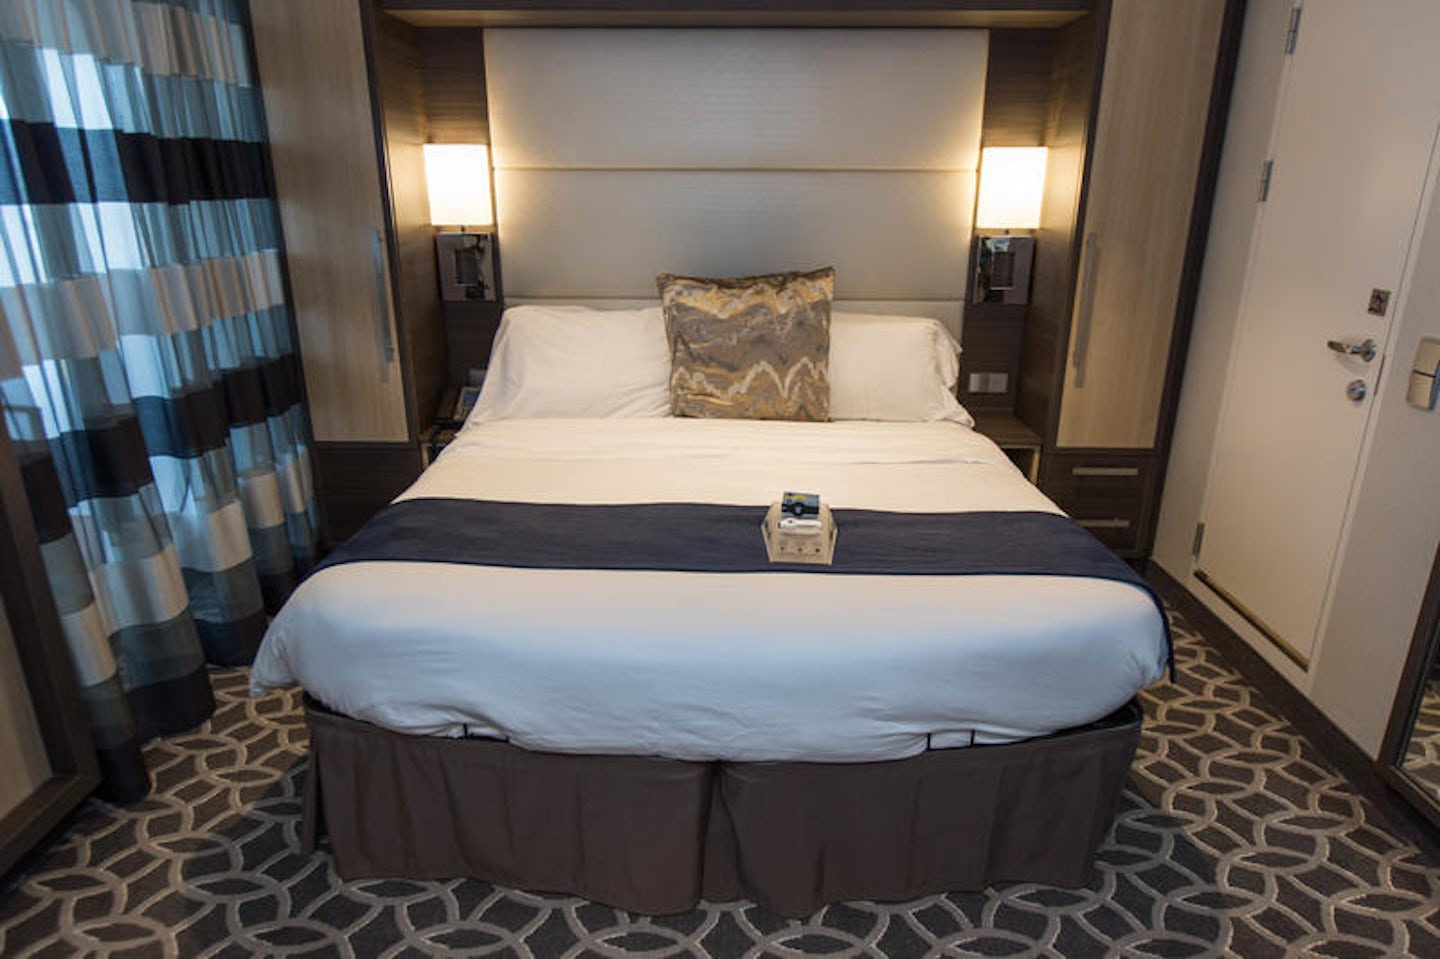 The Deluxe Ocean-View Cabin with Balcony (Obstructed View) on Anthem of the Seas